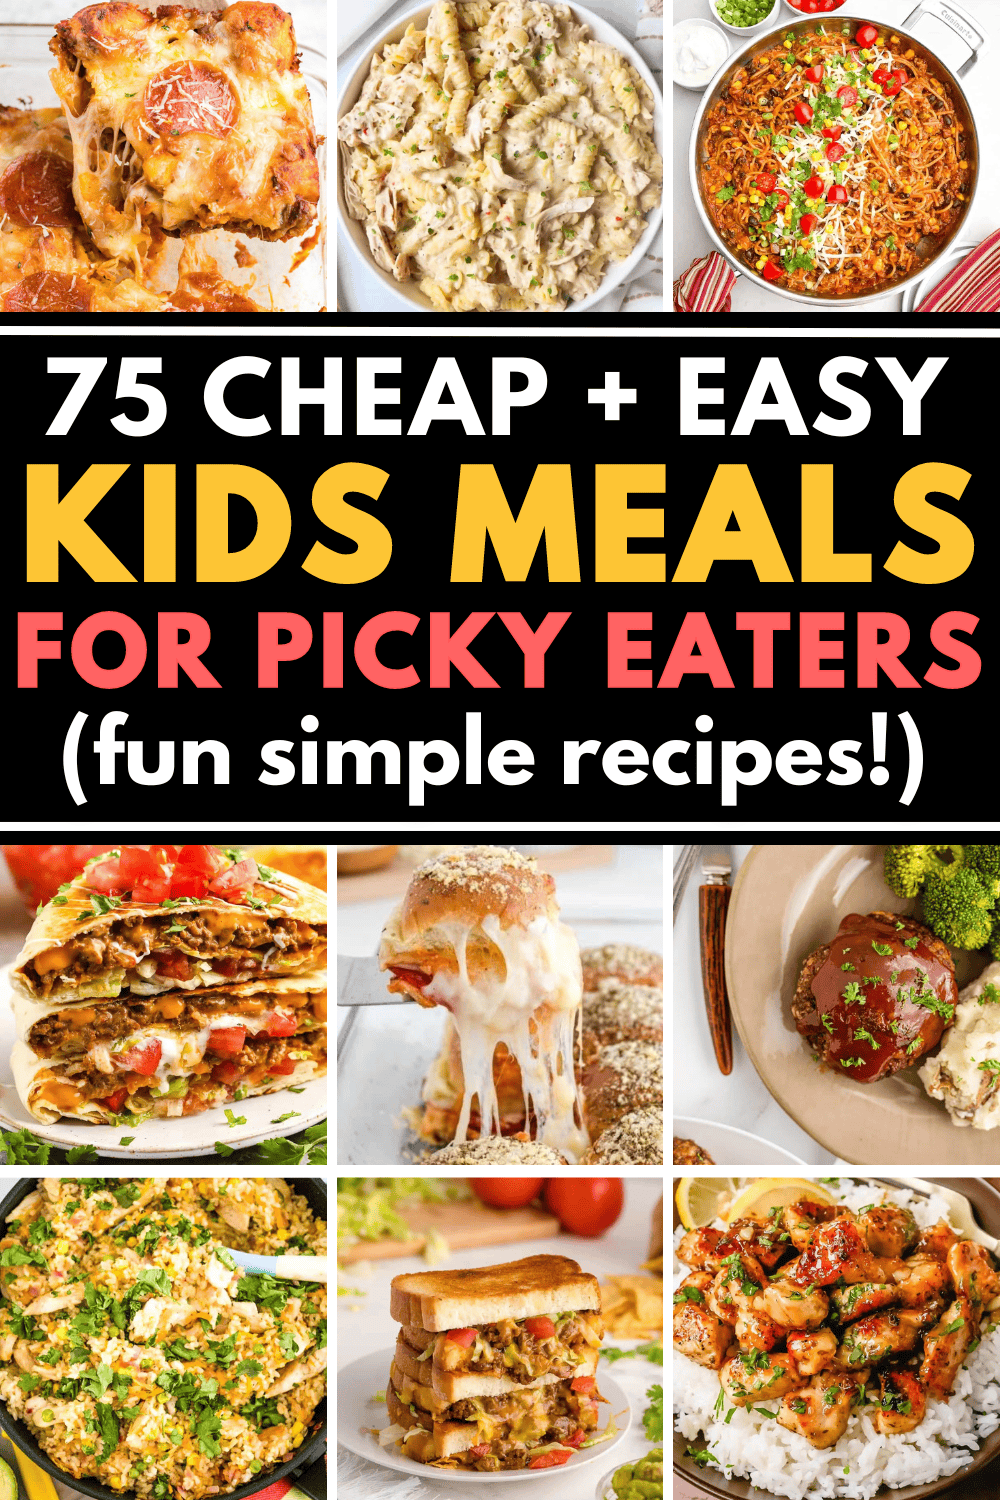 Easy kids meals for picky eaters! Fun family dinner ideas perfect for busy moms cooking for picky kids on hectic weeknights. Meal planning for young kids is hard, so add some cheap family friendly dinners to the menu. Kids meal ideas dinner, kids meal aesthetic, easy toddler meals, picky eater recipes, quick easy meals for kids, kids meal recipes, easy family dinners, kid friendly meals dinner, dinner recipes for kids, family meals picky eaters, picky kids dinner ideas, easy kid friendly dinners